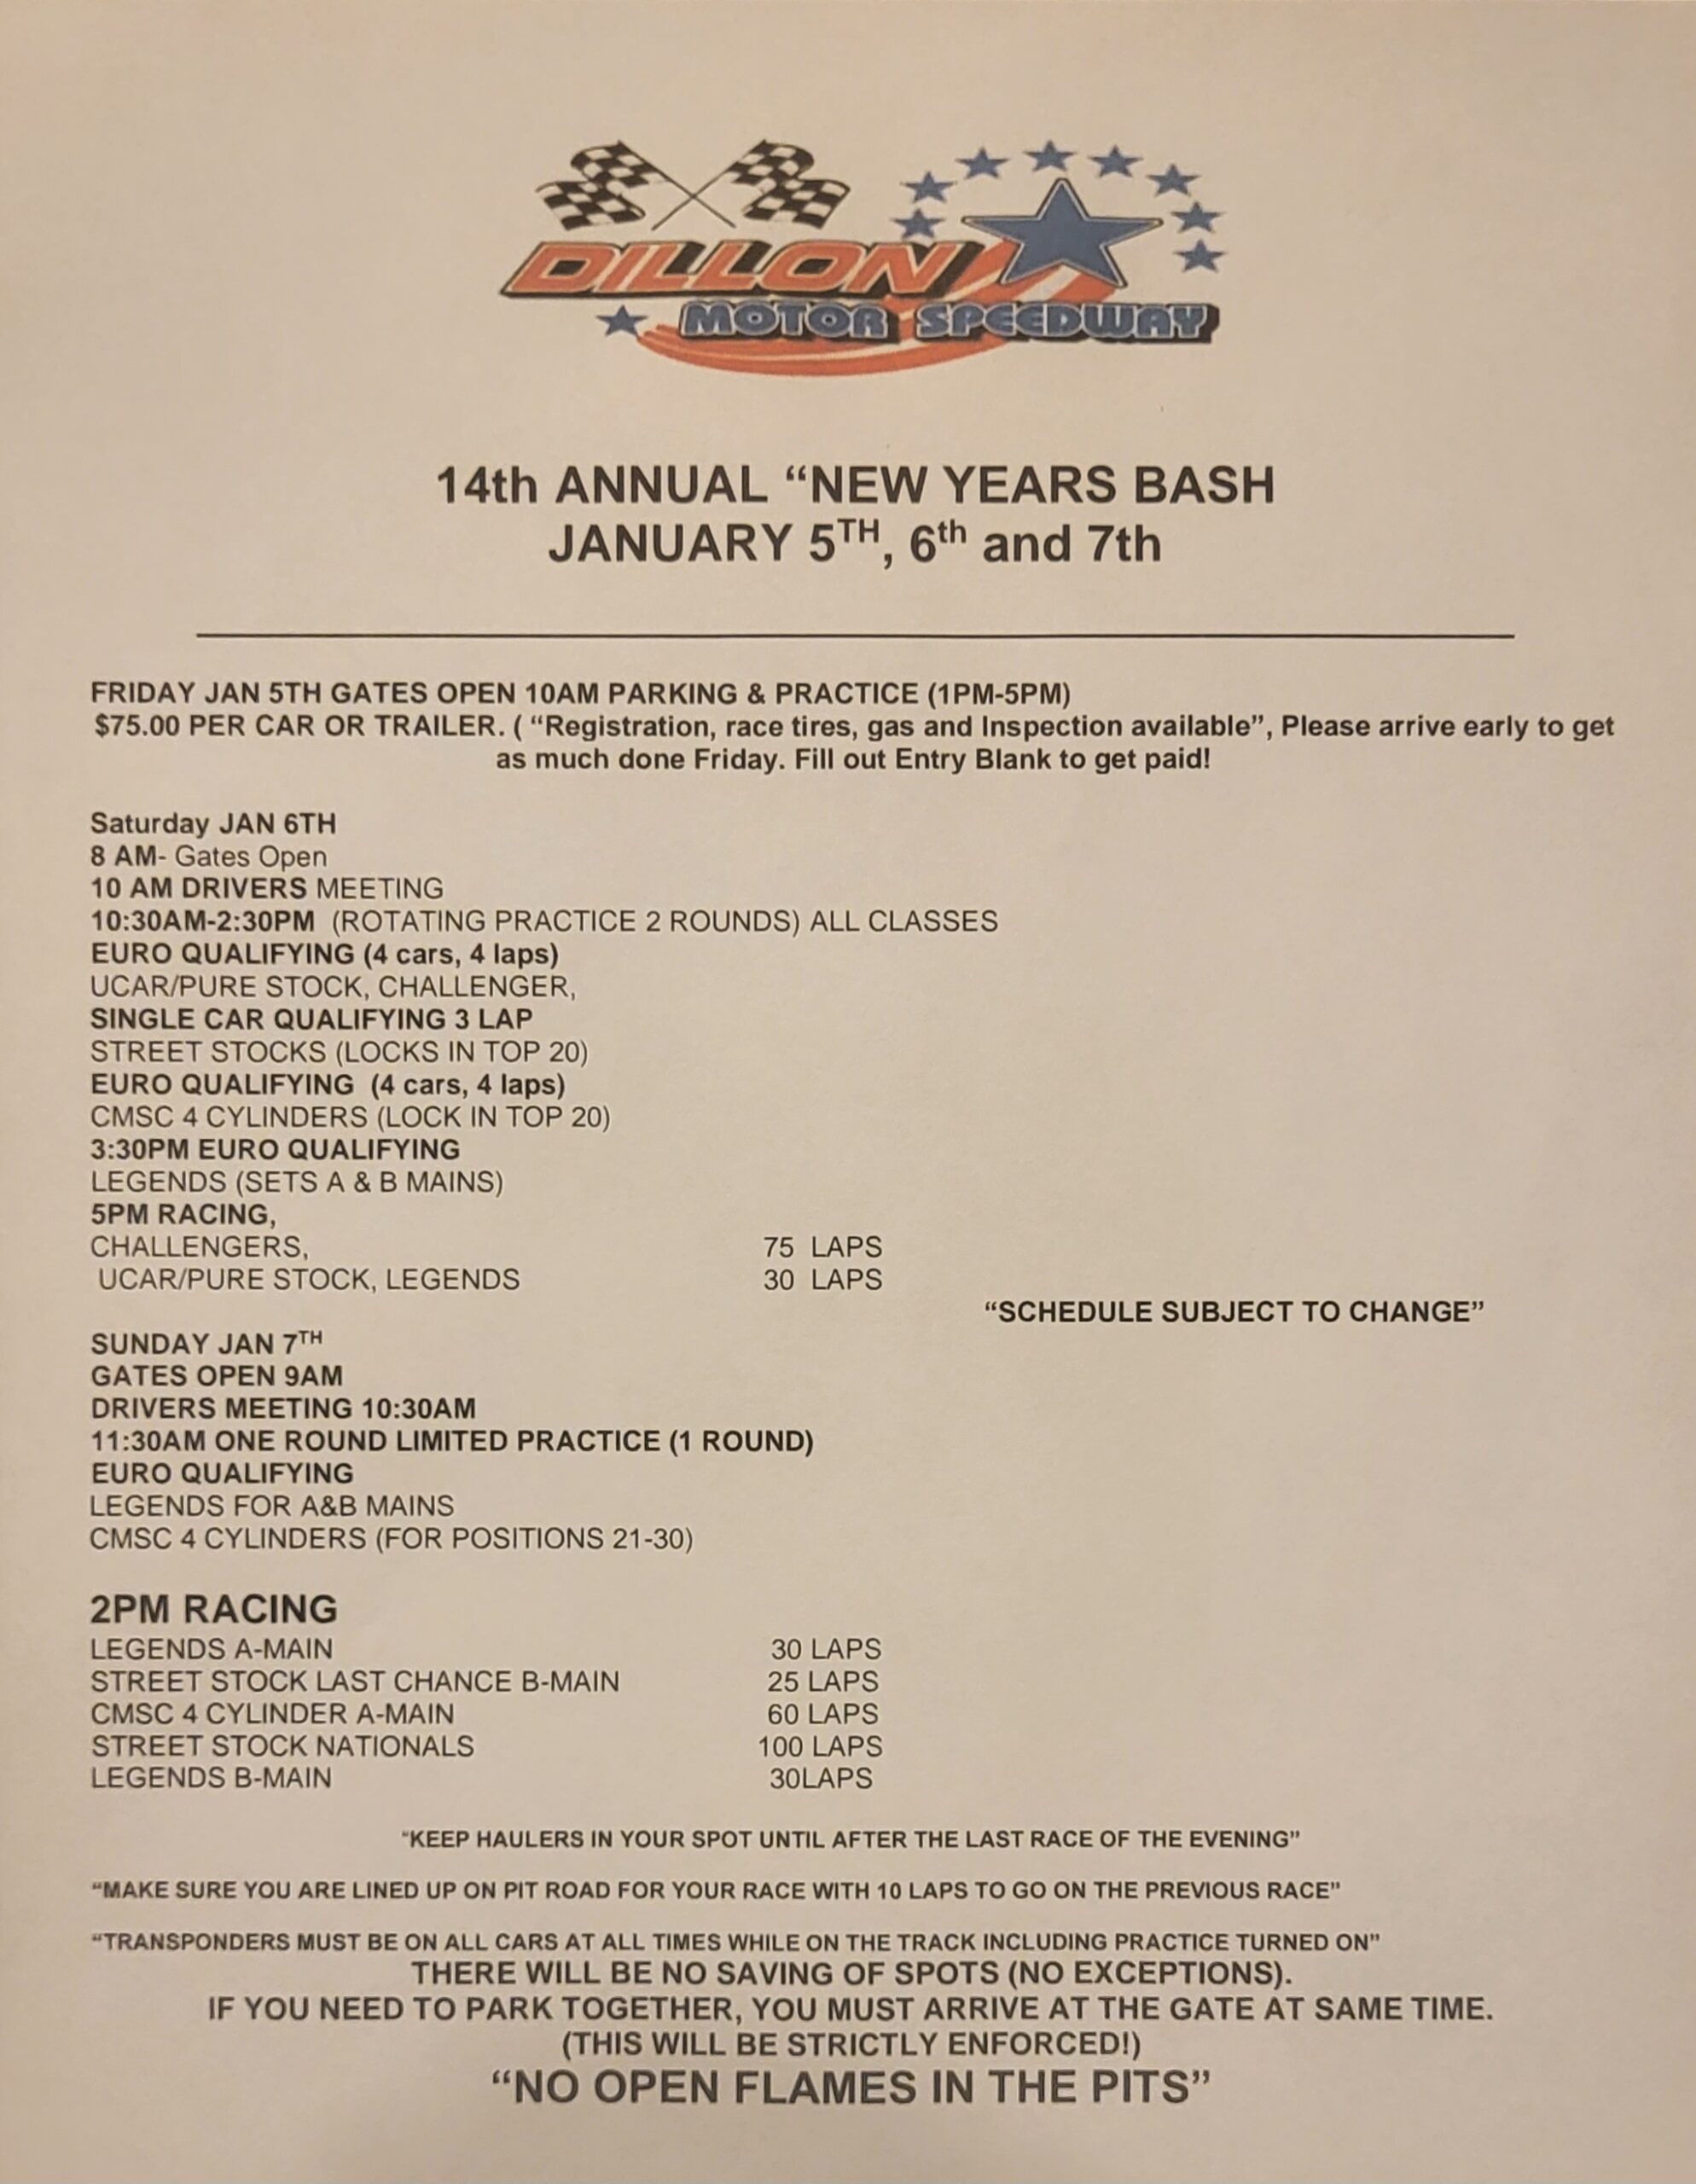 Dillon Motor Speedway New Years BASH Schedule